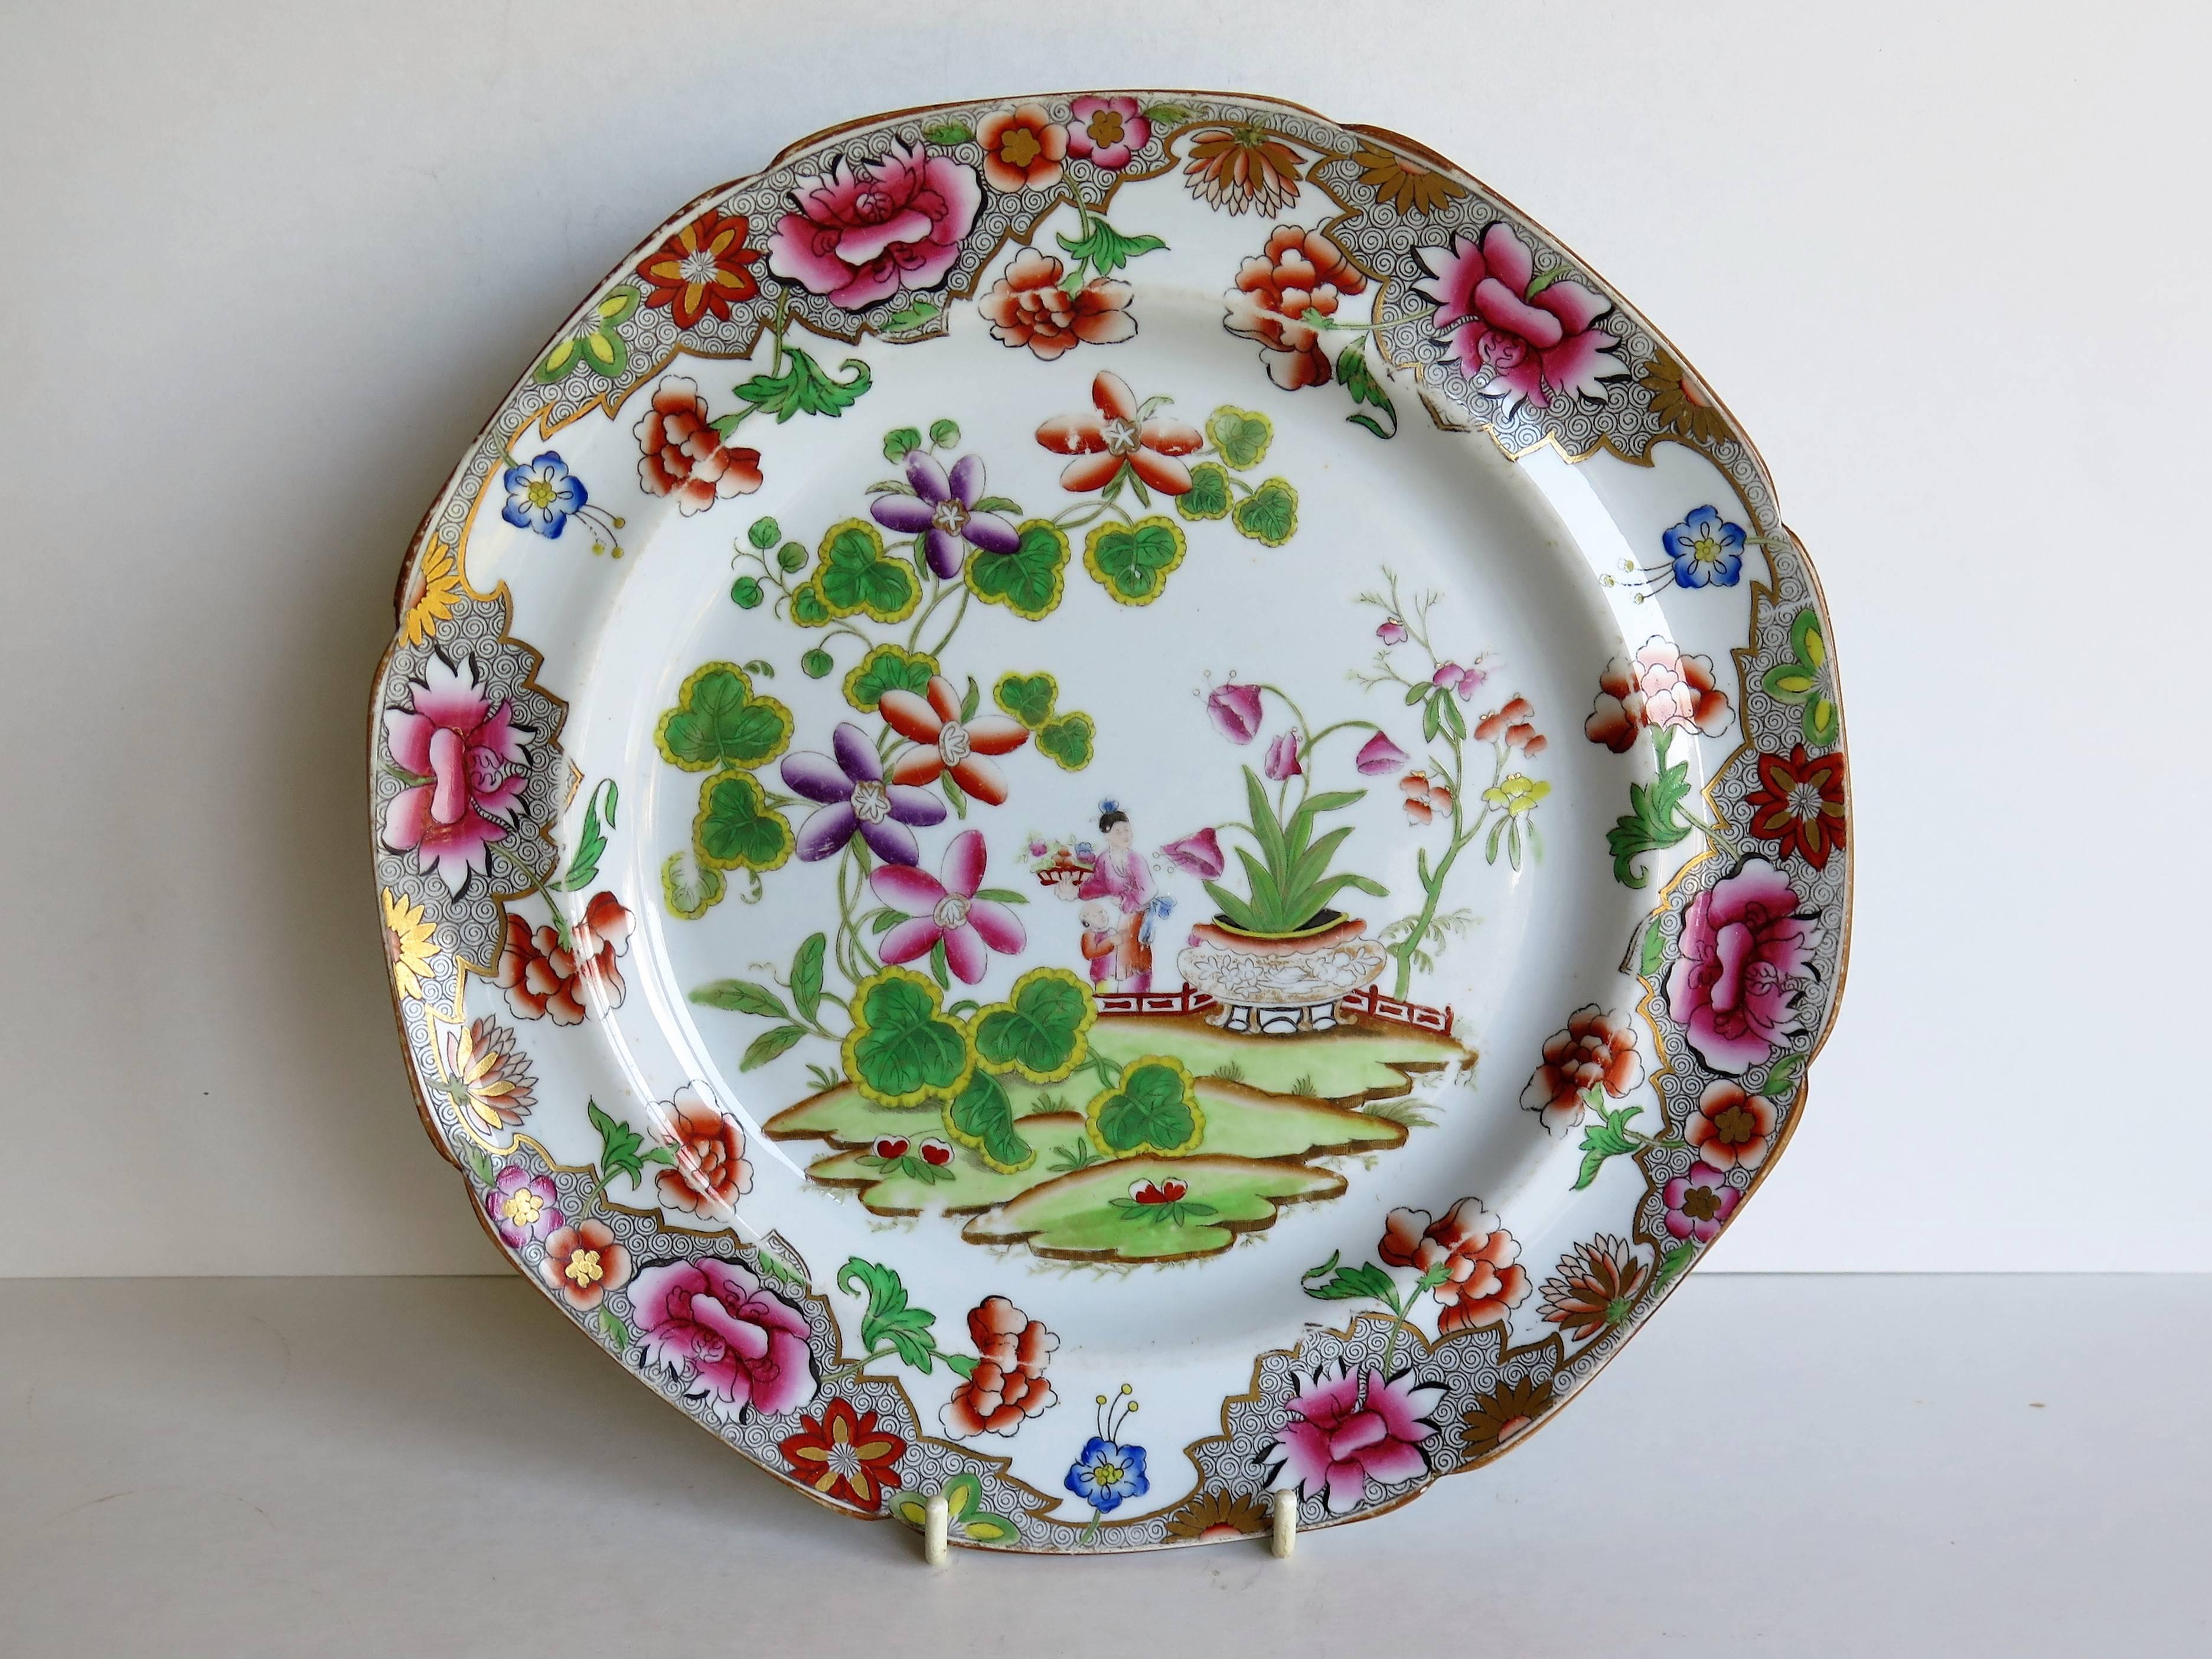 This is a beautiful dinner plate, produced by the Spode factory, circa 1820.

The plate has a large diameter ( over 9.5 inches) with a scalloped edge rim.

This is pattern number 3703, the chinoiserie decoration being transfer printed in grey